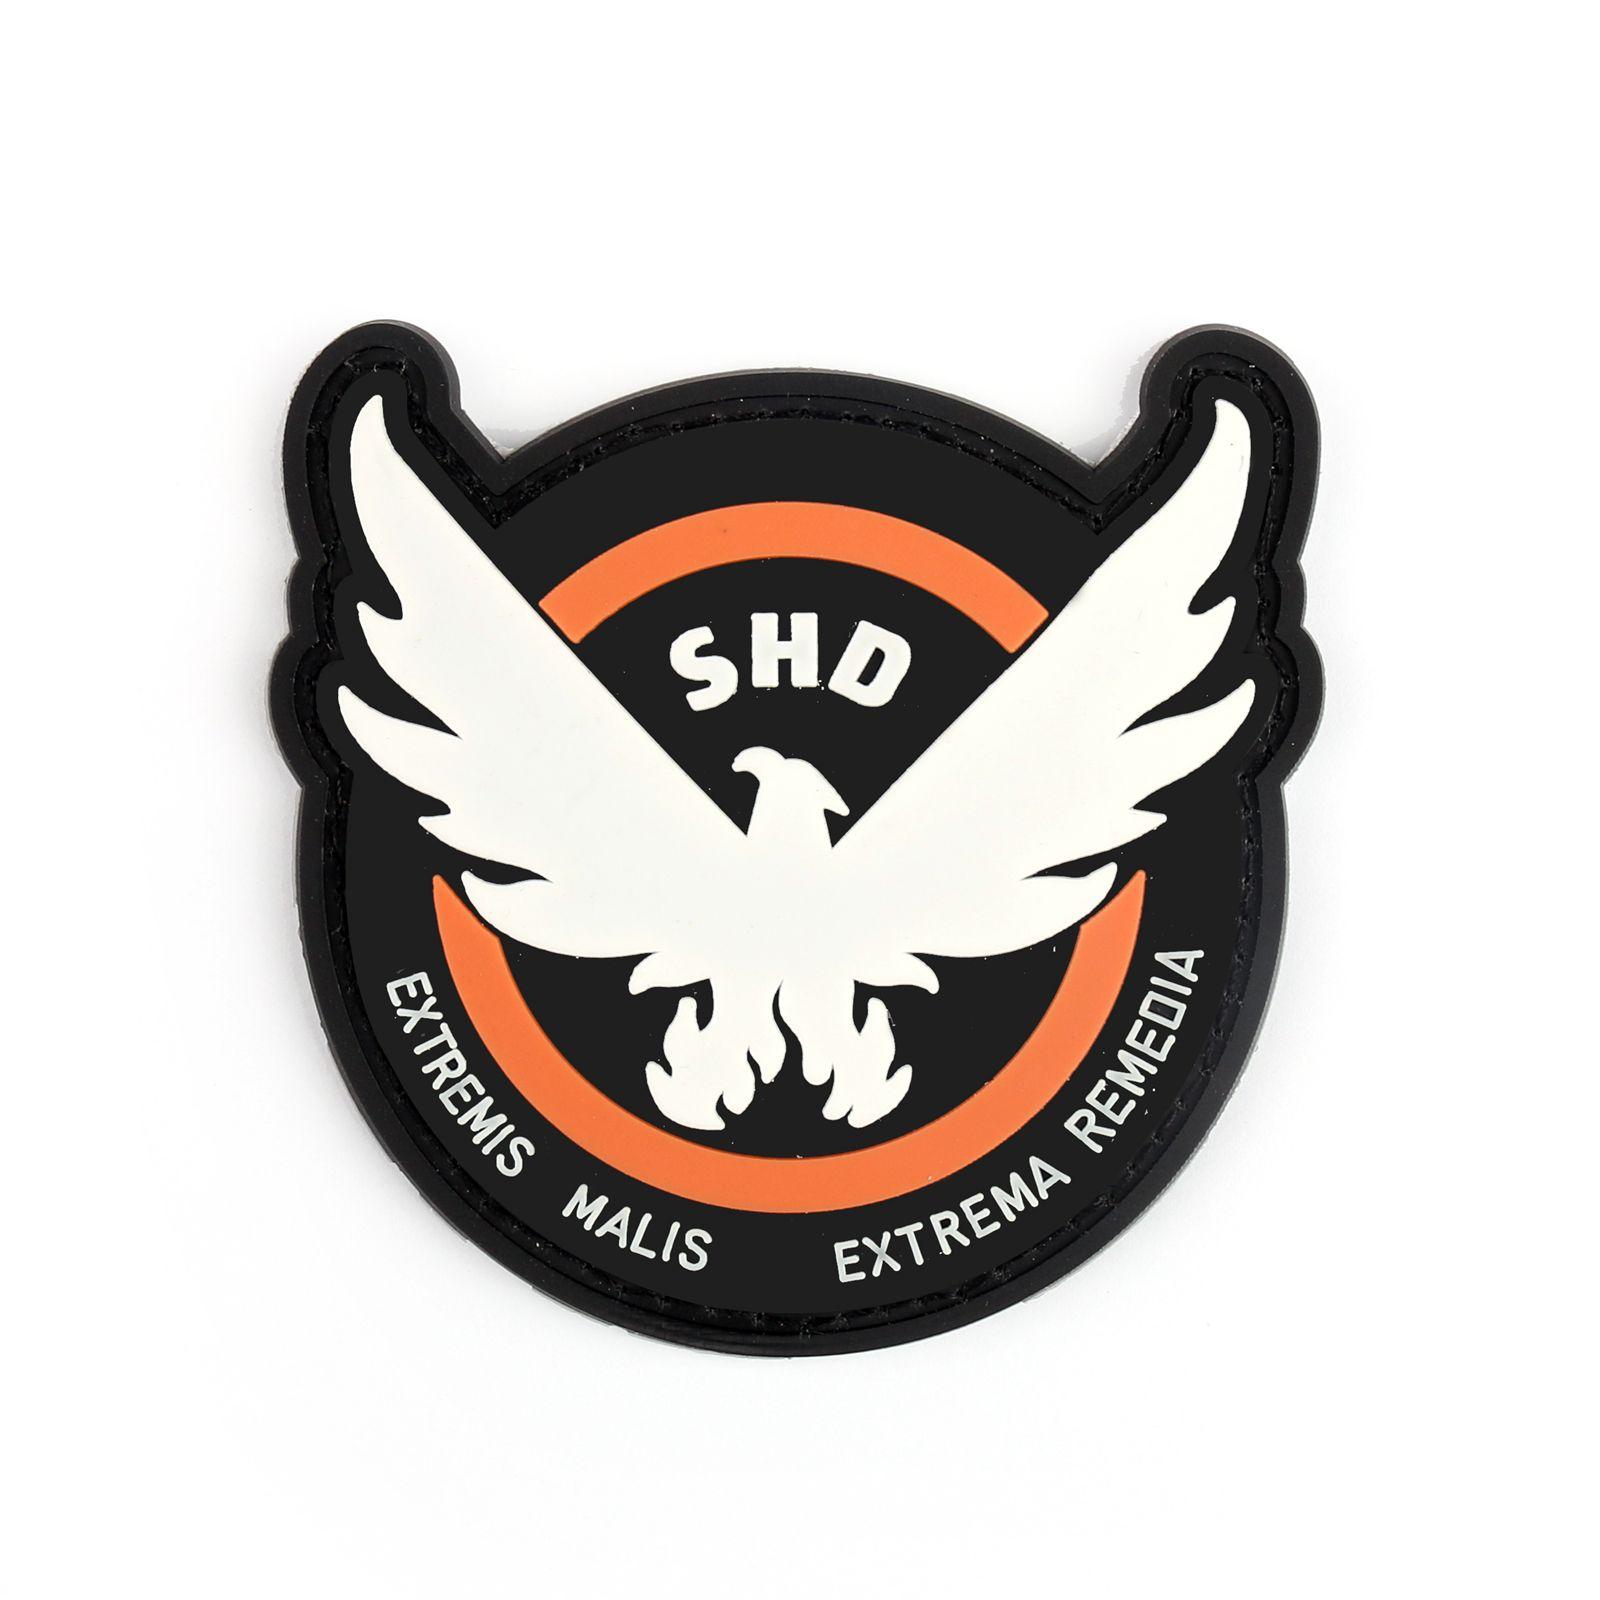 The Division Logo - 9CM Tom Clancy's The Division Agent SHD logo Hook Loop patch badge